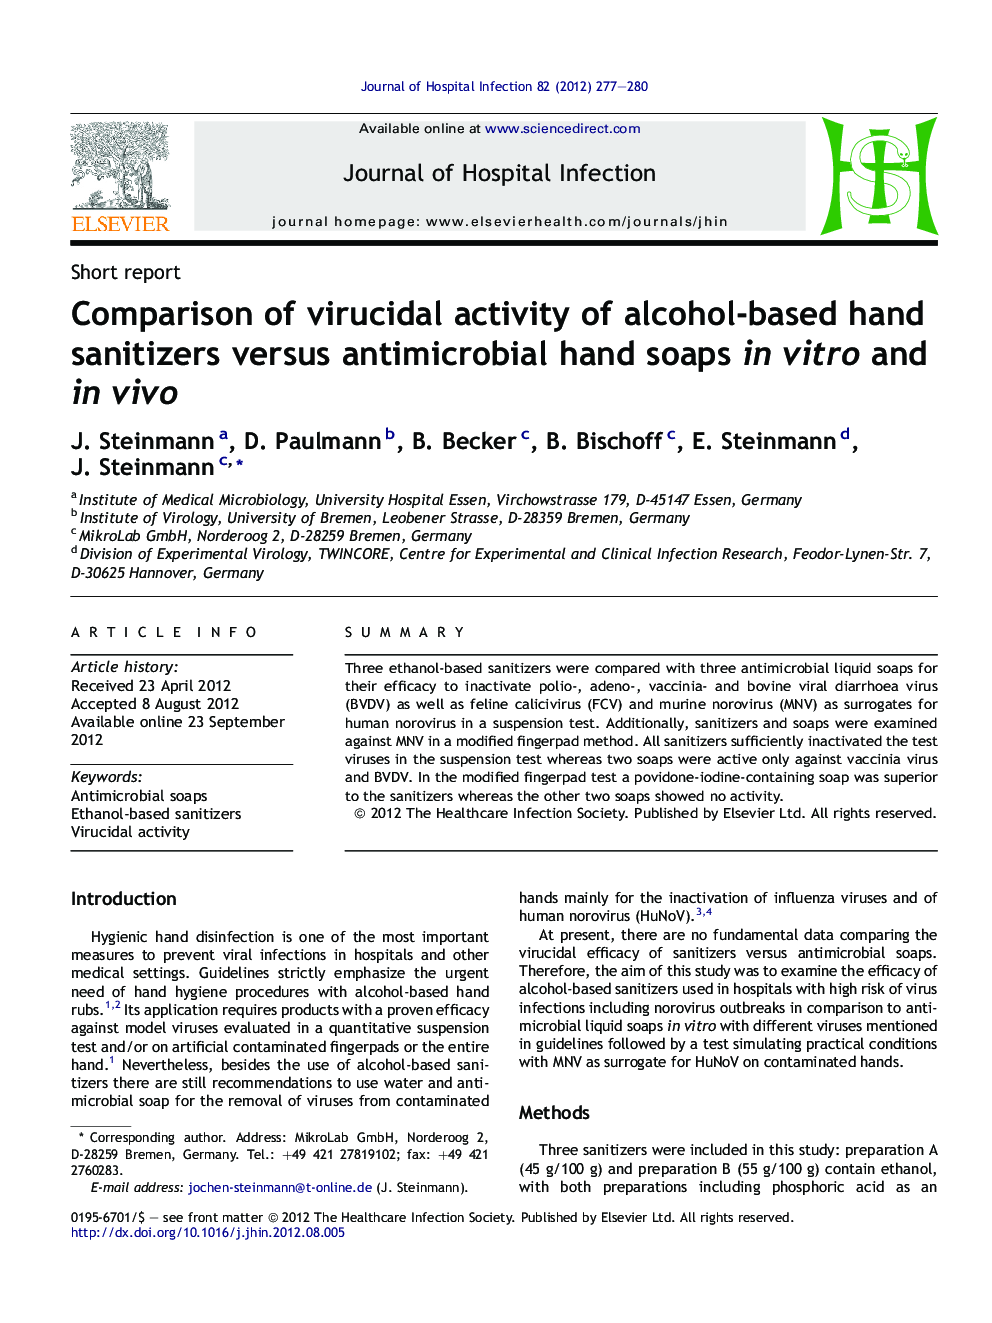 Comparison of virucidal activity of alcohol-based hand sanitizers versus antimicrobial hand soaps in vitro and in vivo